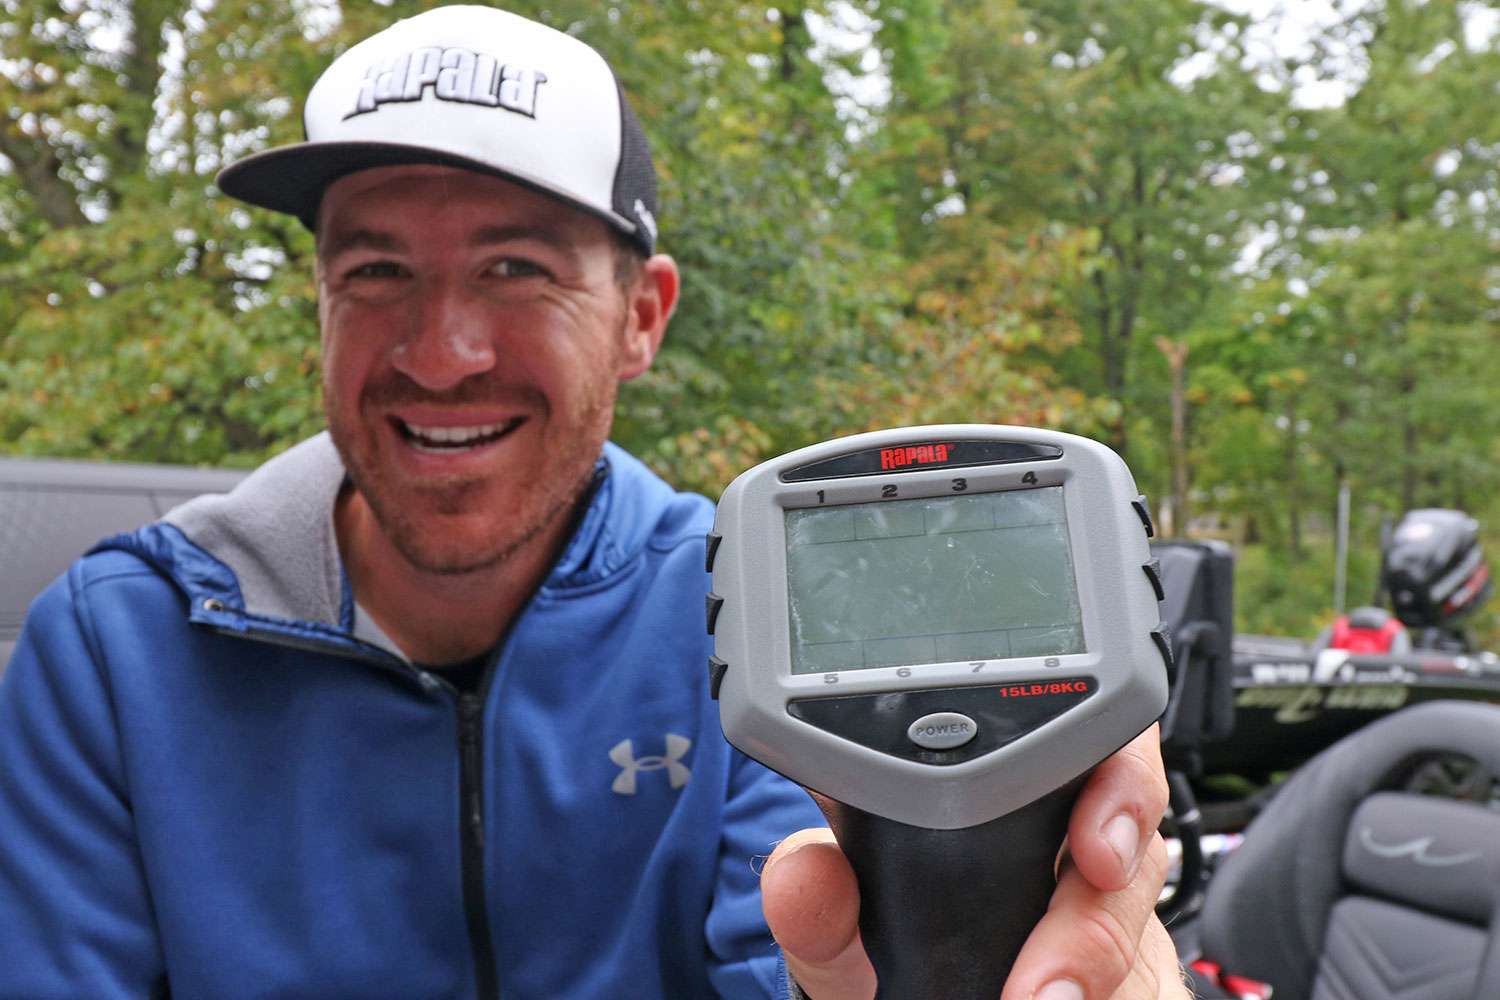 He said that exaggerating fish size is no longer a factor, especially when you have a quality scale handy. A Rapala digital scale will help you know for sure how much your fish weighed. It'll keep you honest, he said. 